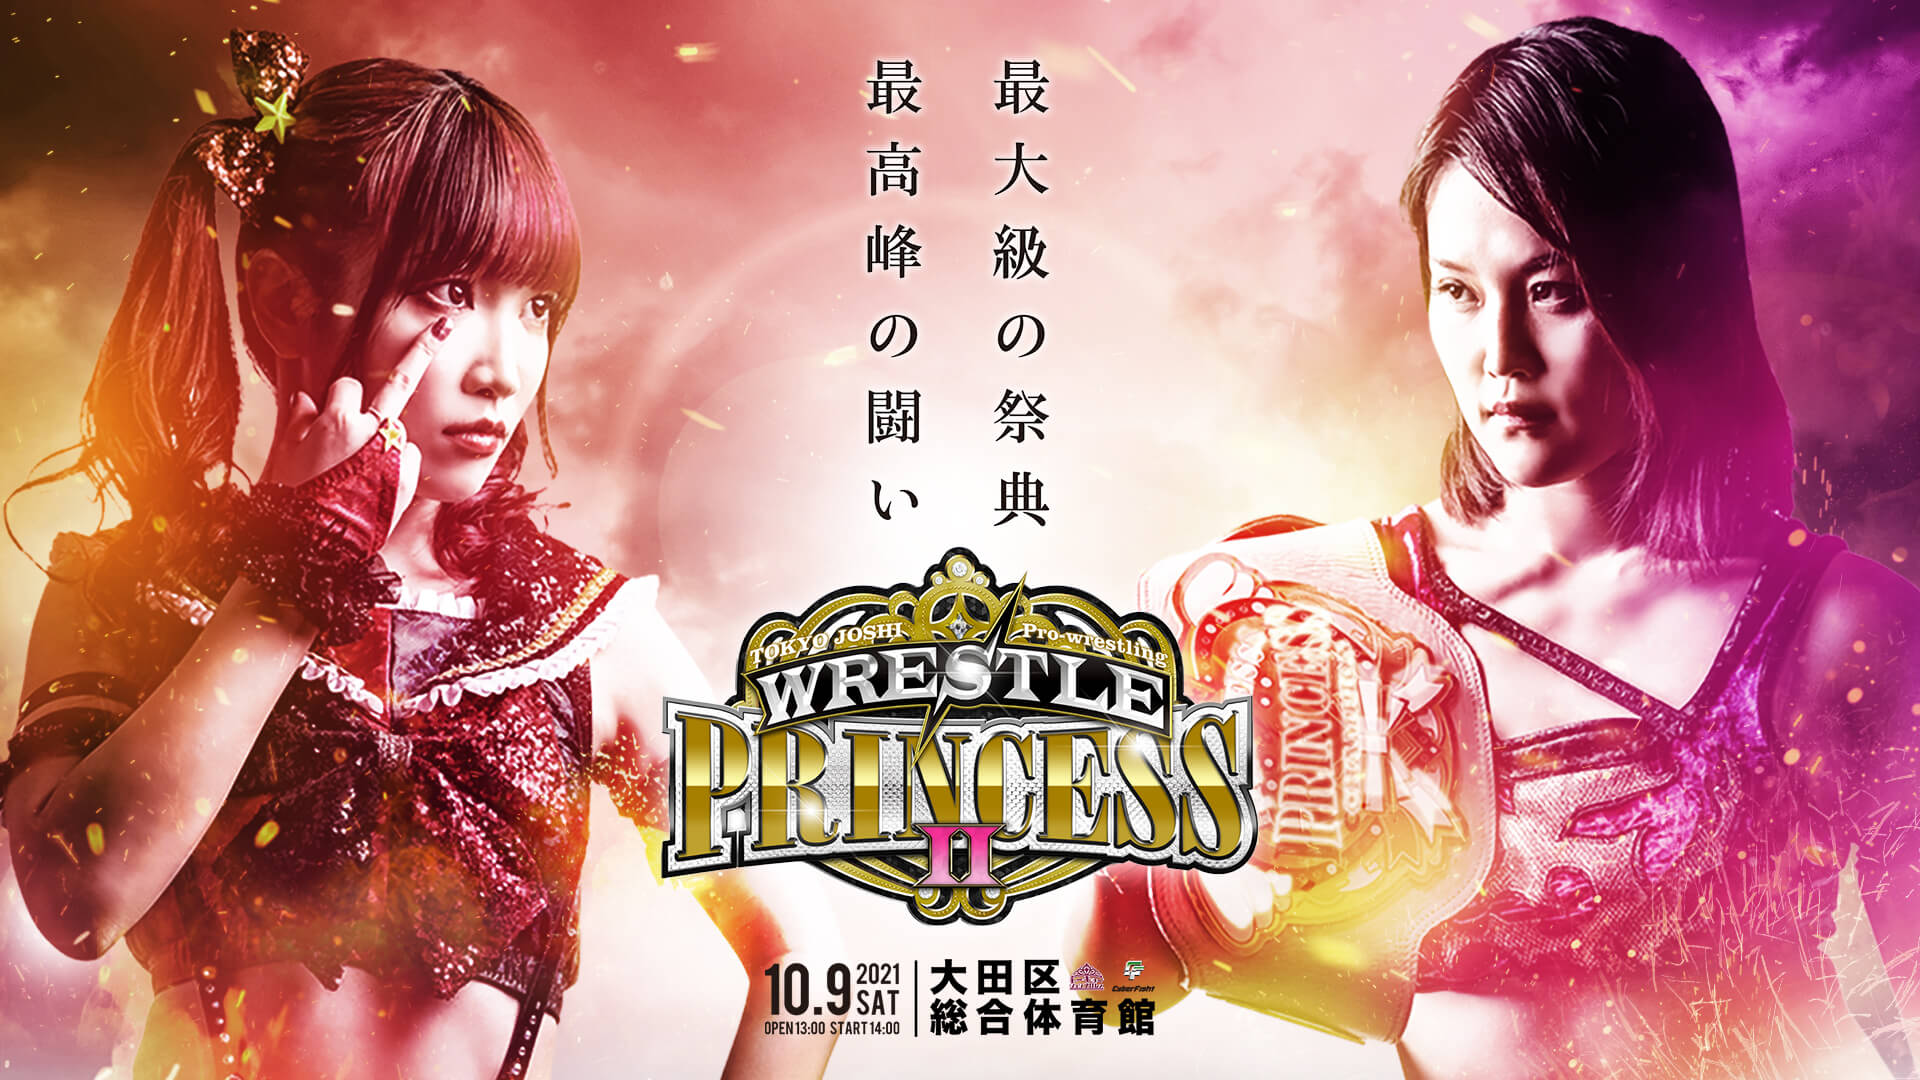 Watch WRESTLE PRINCESS Ⅱ on WRESTLE UNIVERSE | WRESTLE UNIVERSE is a pro- wrestling streaming service. DDT, Pro-Wrestling NOAH, Tokyo Joshi Pro- Wrestling, Ganbare Pro-Wrestling, Rojo Pro-Wresstling(Pro-Wrestling in  Public) are now available. High quality